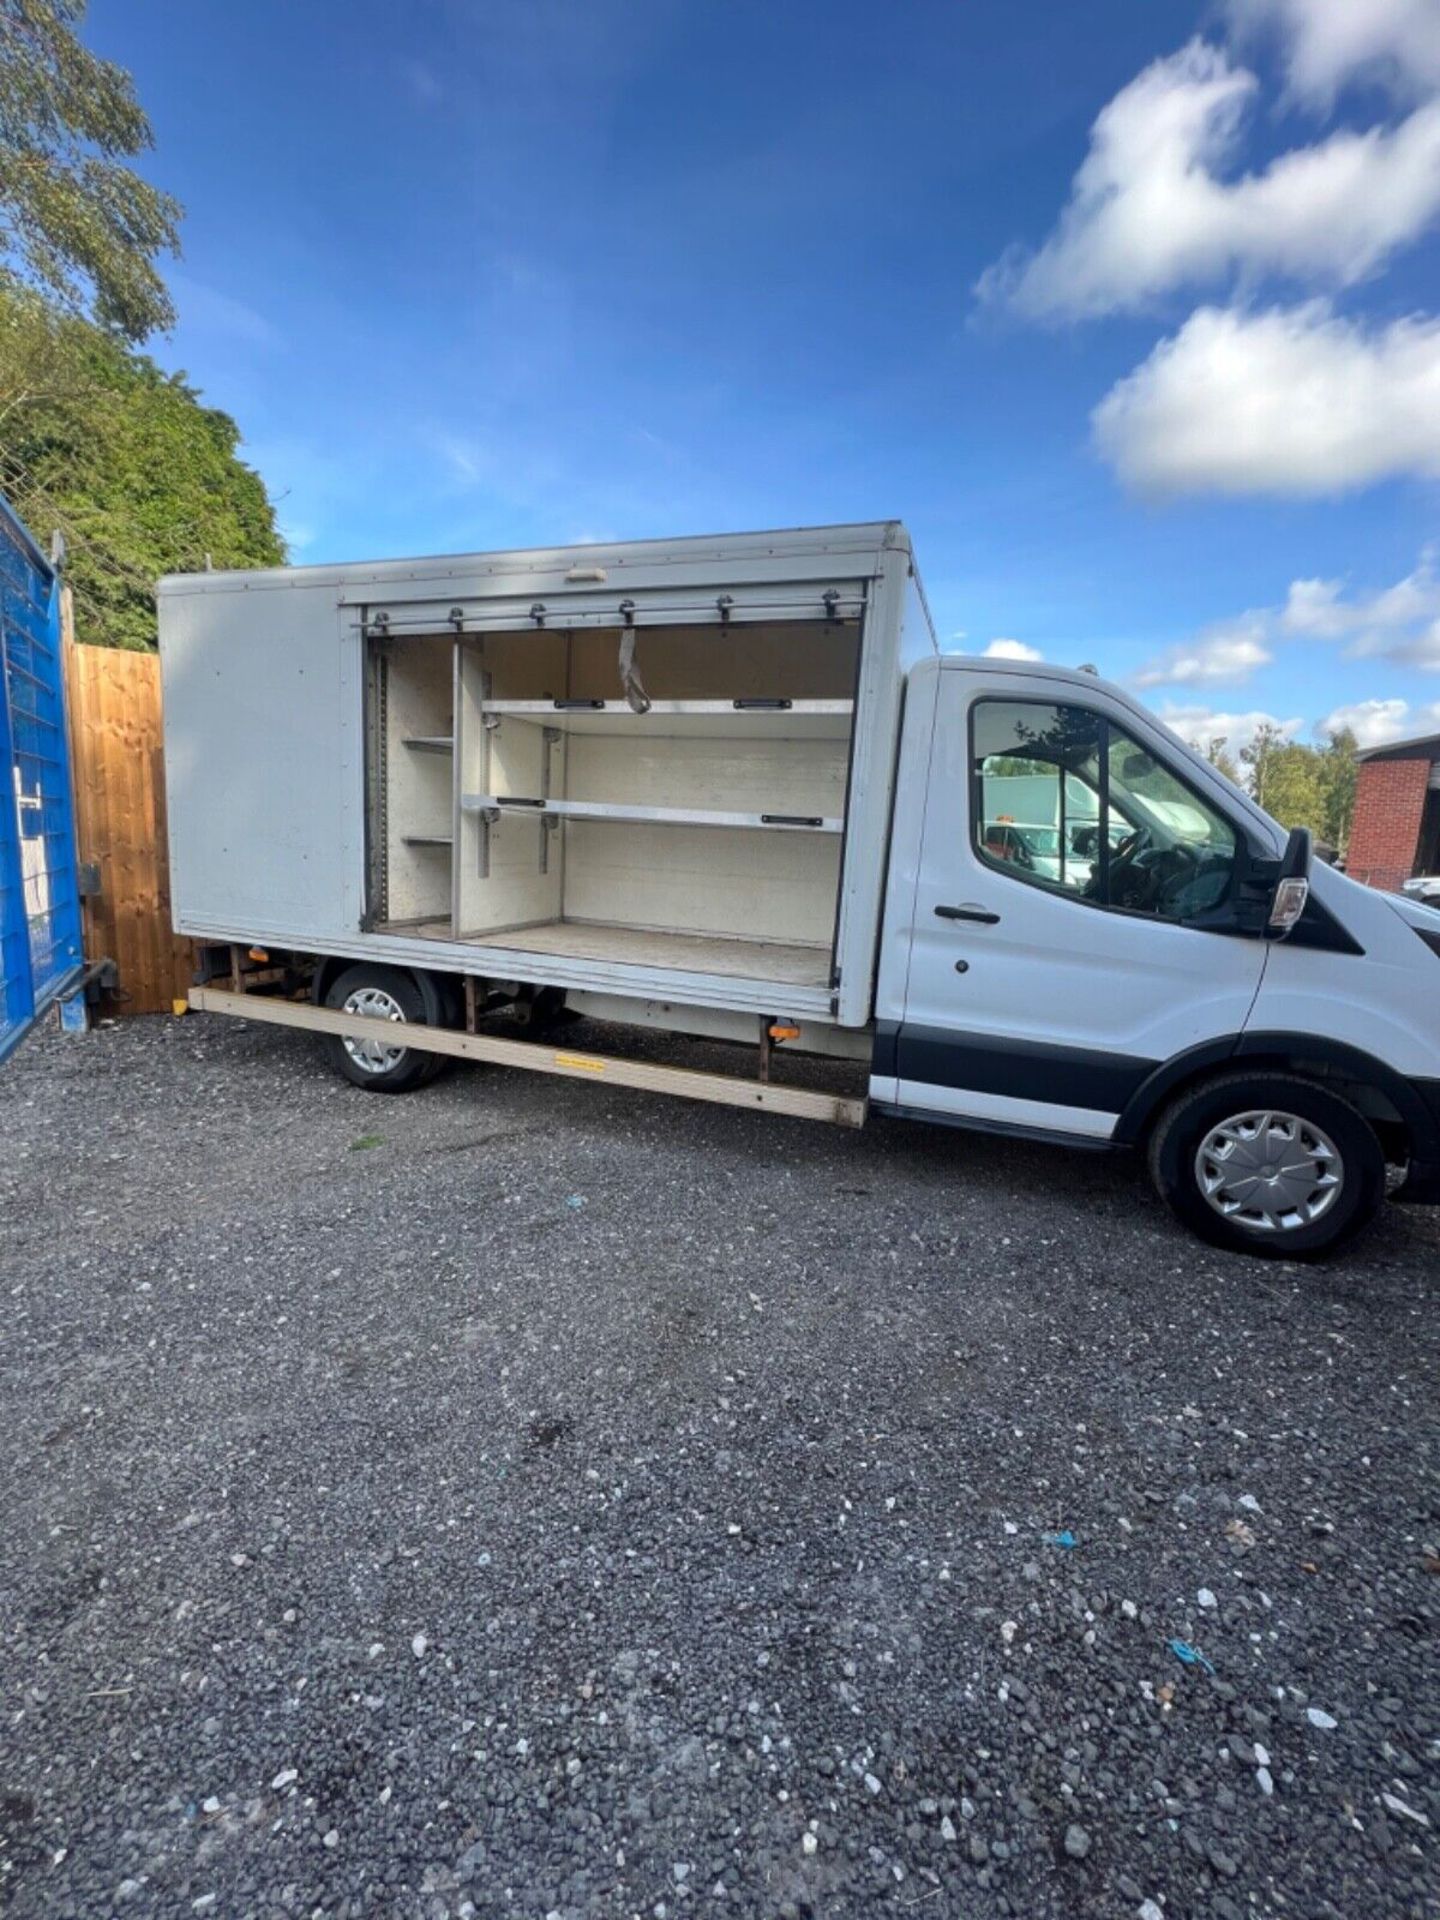 FORD TRANSIT BOX VAN 2017 LUTON EURO6 LWB 6 SPEED MANUAL 1COMPANY OWNER FROM NEW - Image 15 of 15